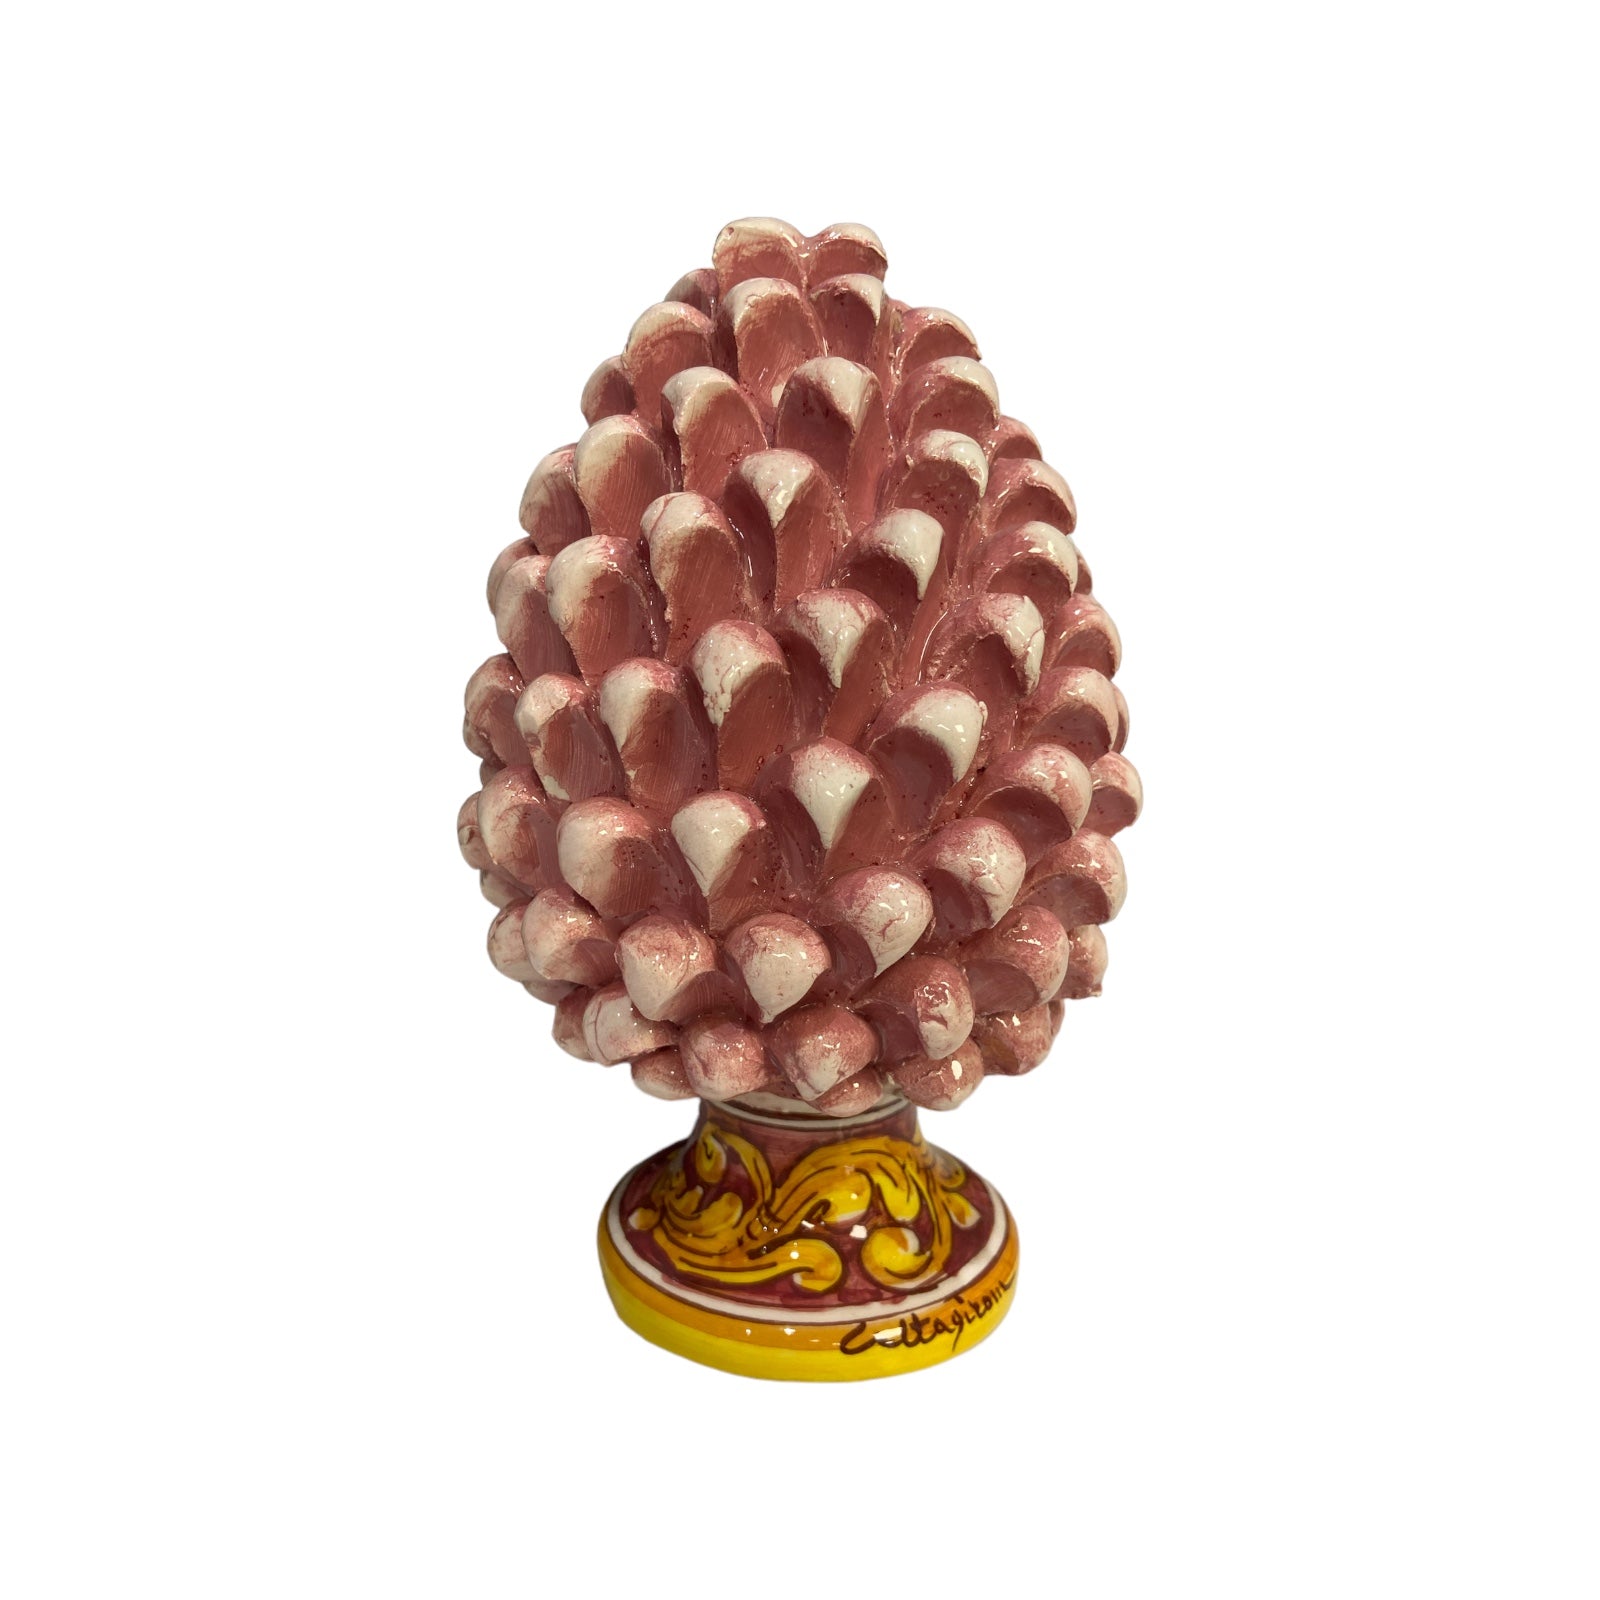 Sicilian Ceramic Pine Cone from Caltagirone, antique pink color with decorated stem, height 21cm